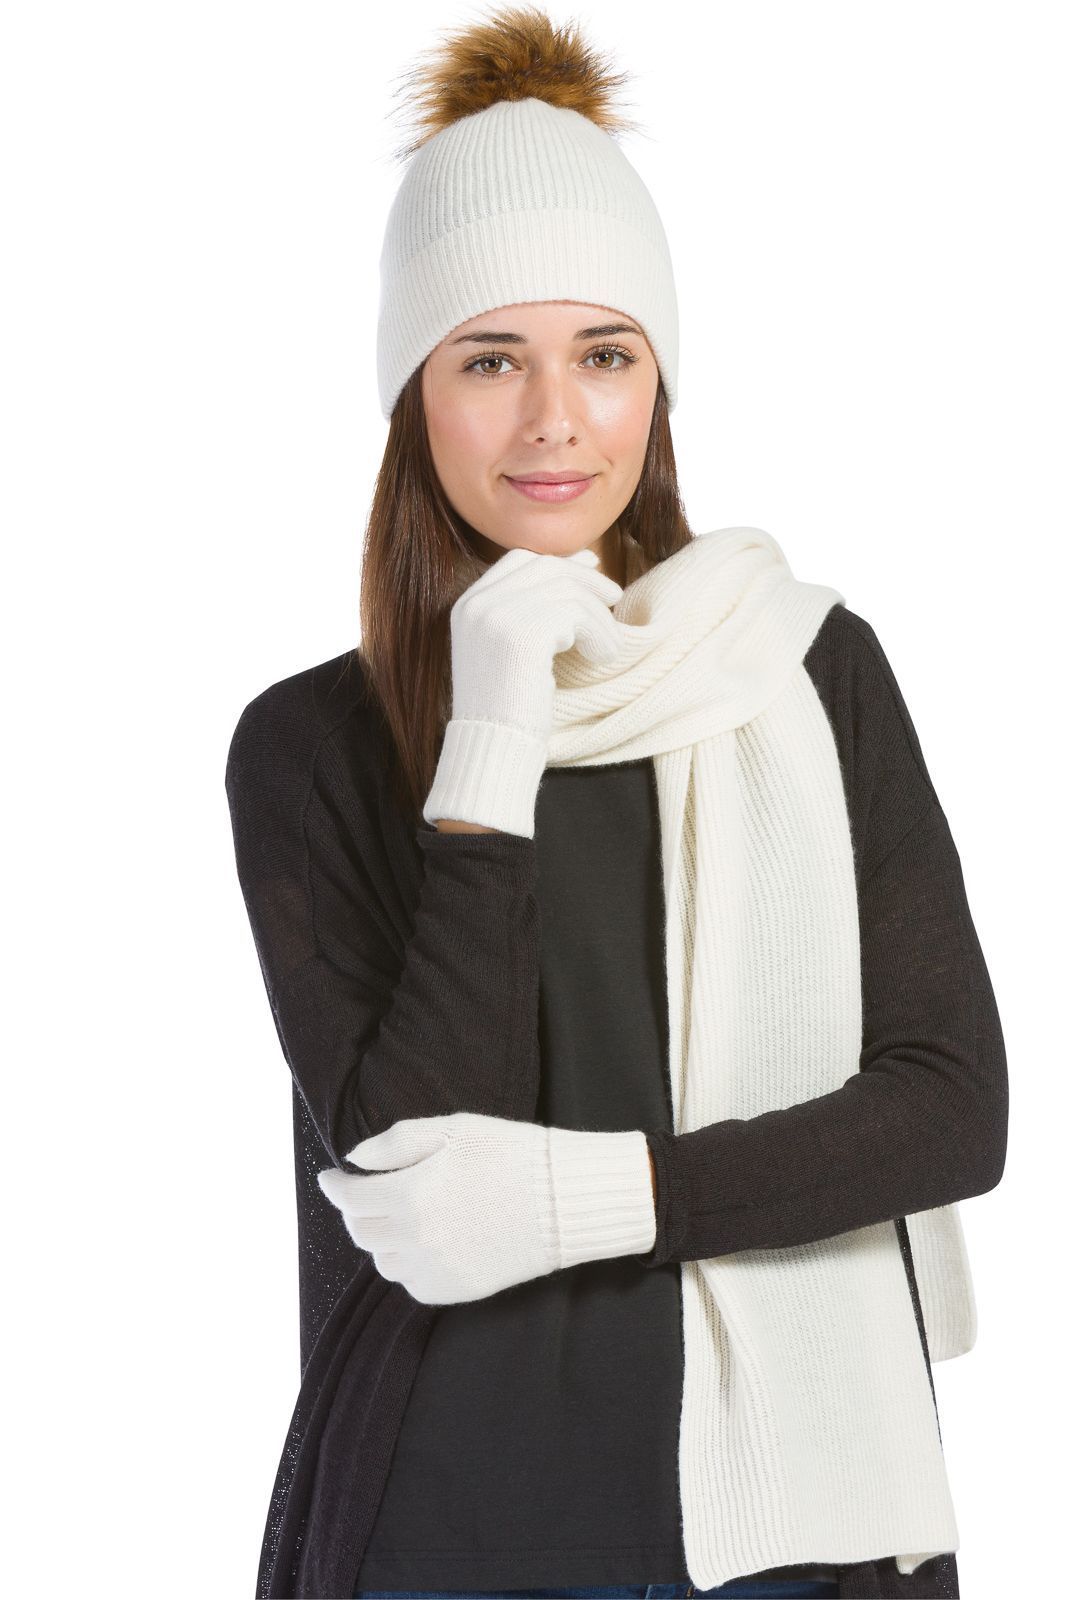 Winter Beret and Scarf Combo